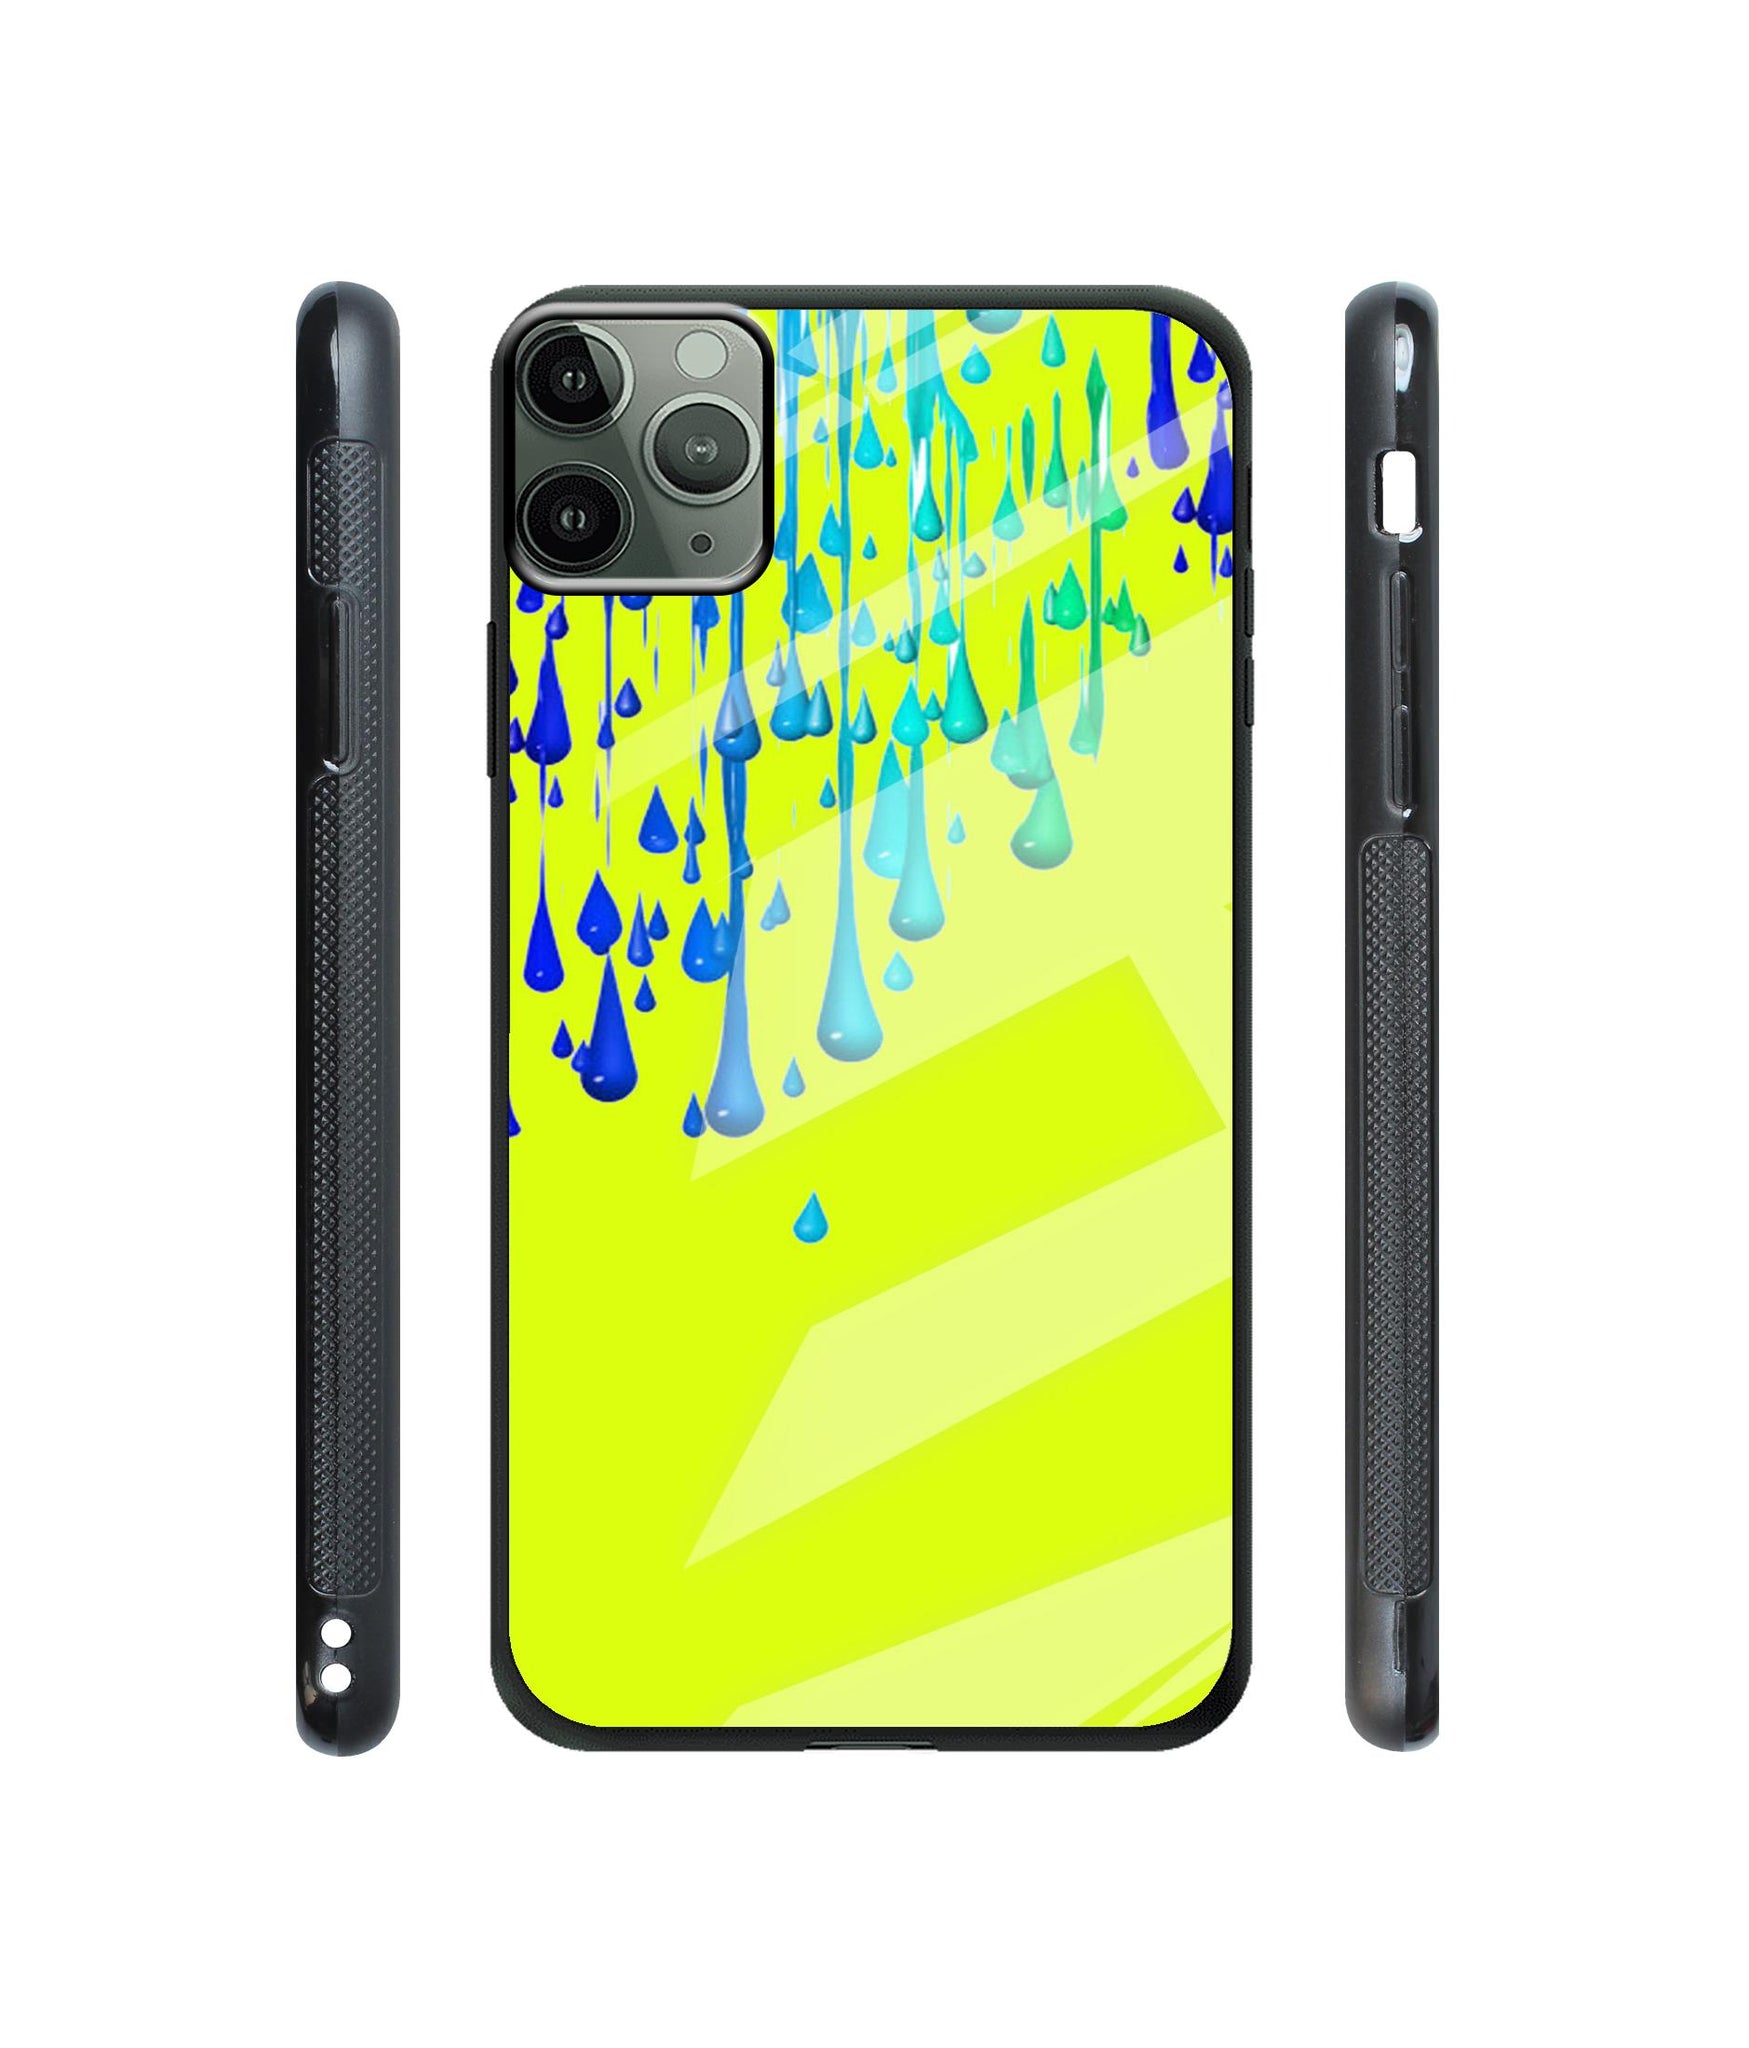 Neon Paint Designer Printed Glass Cover for Apple iPhone 11 Pro Max